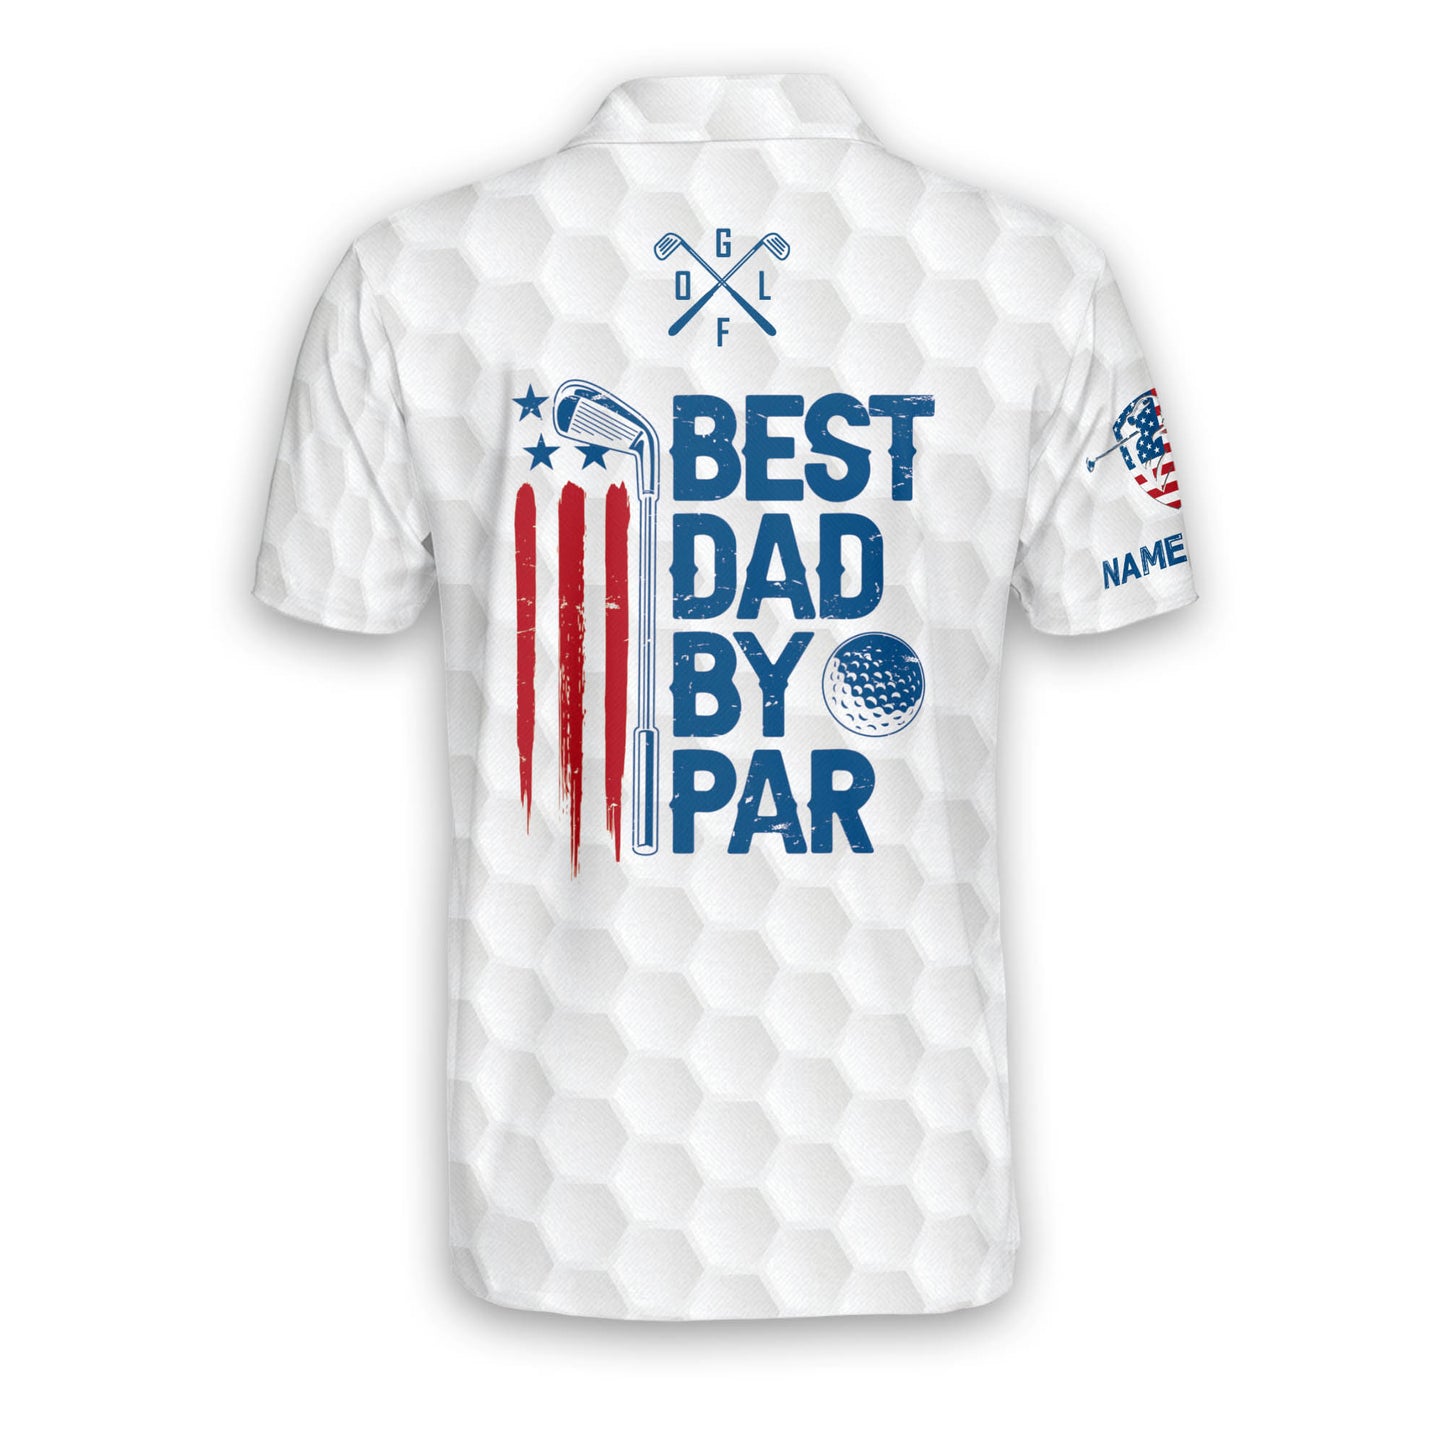 The Golf Father Best Dad By Par Golf Polo Shirt GM0096